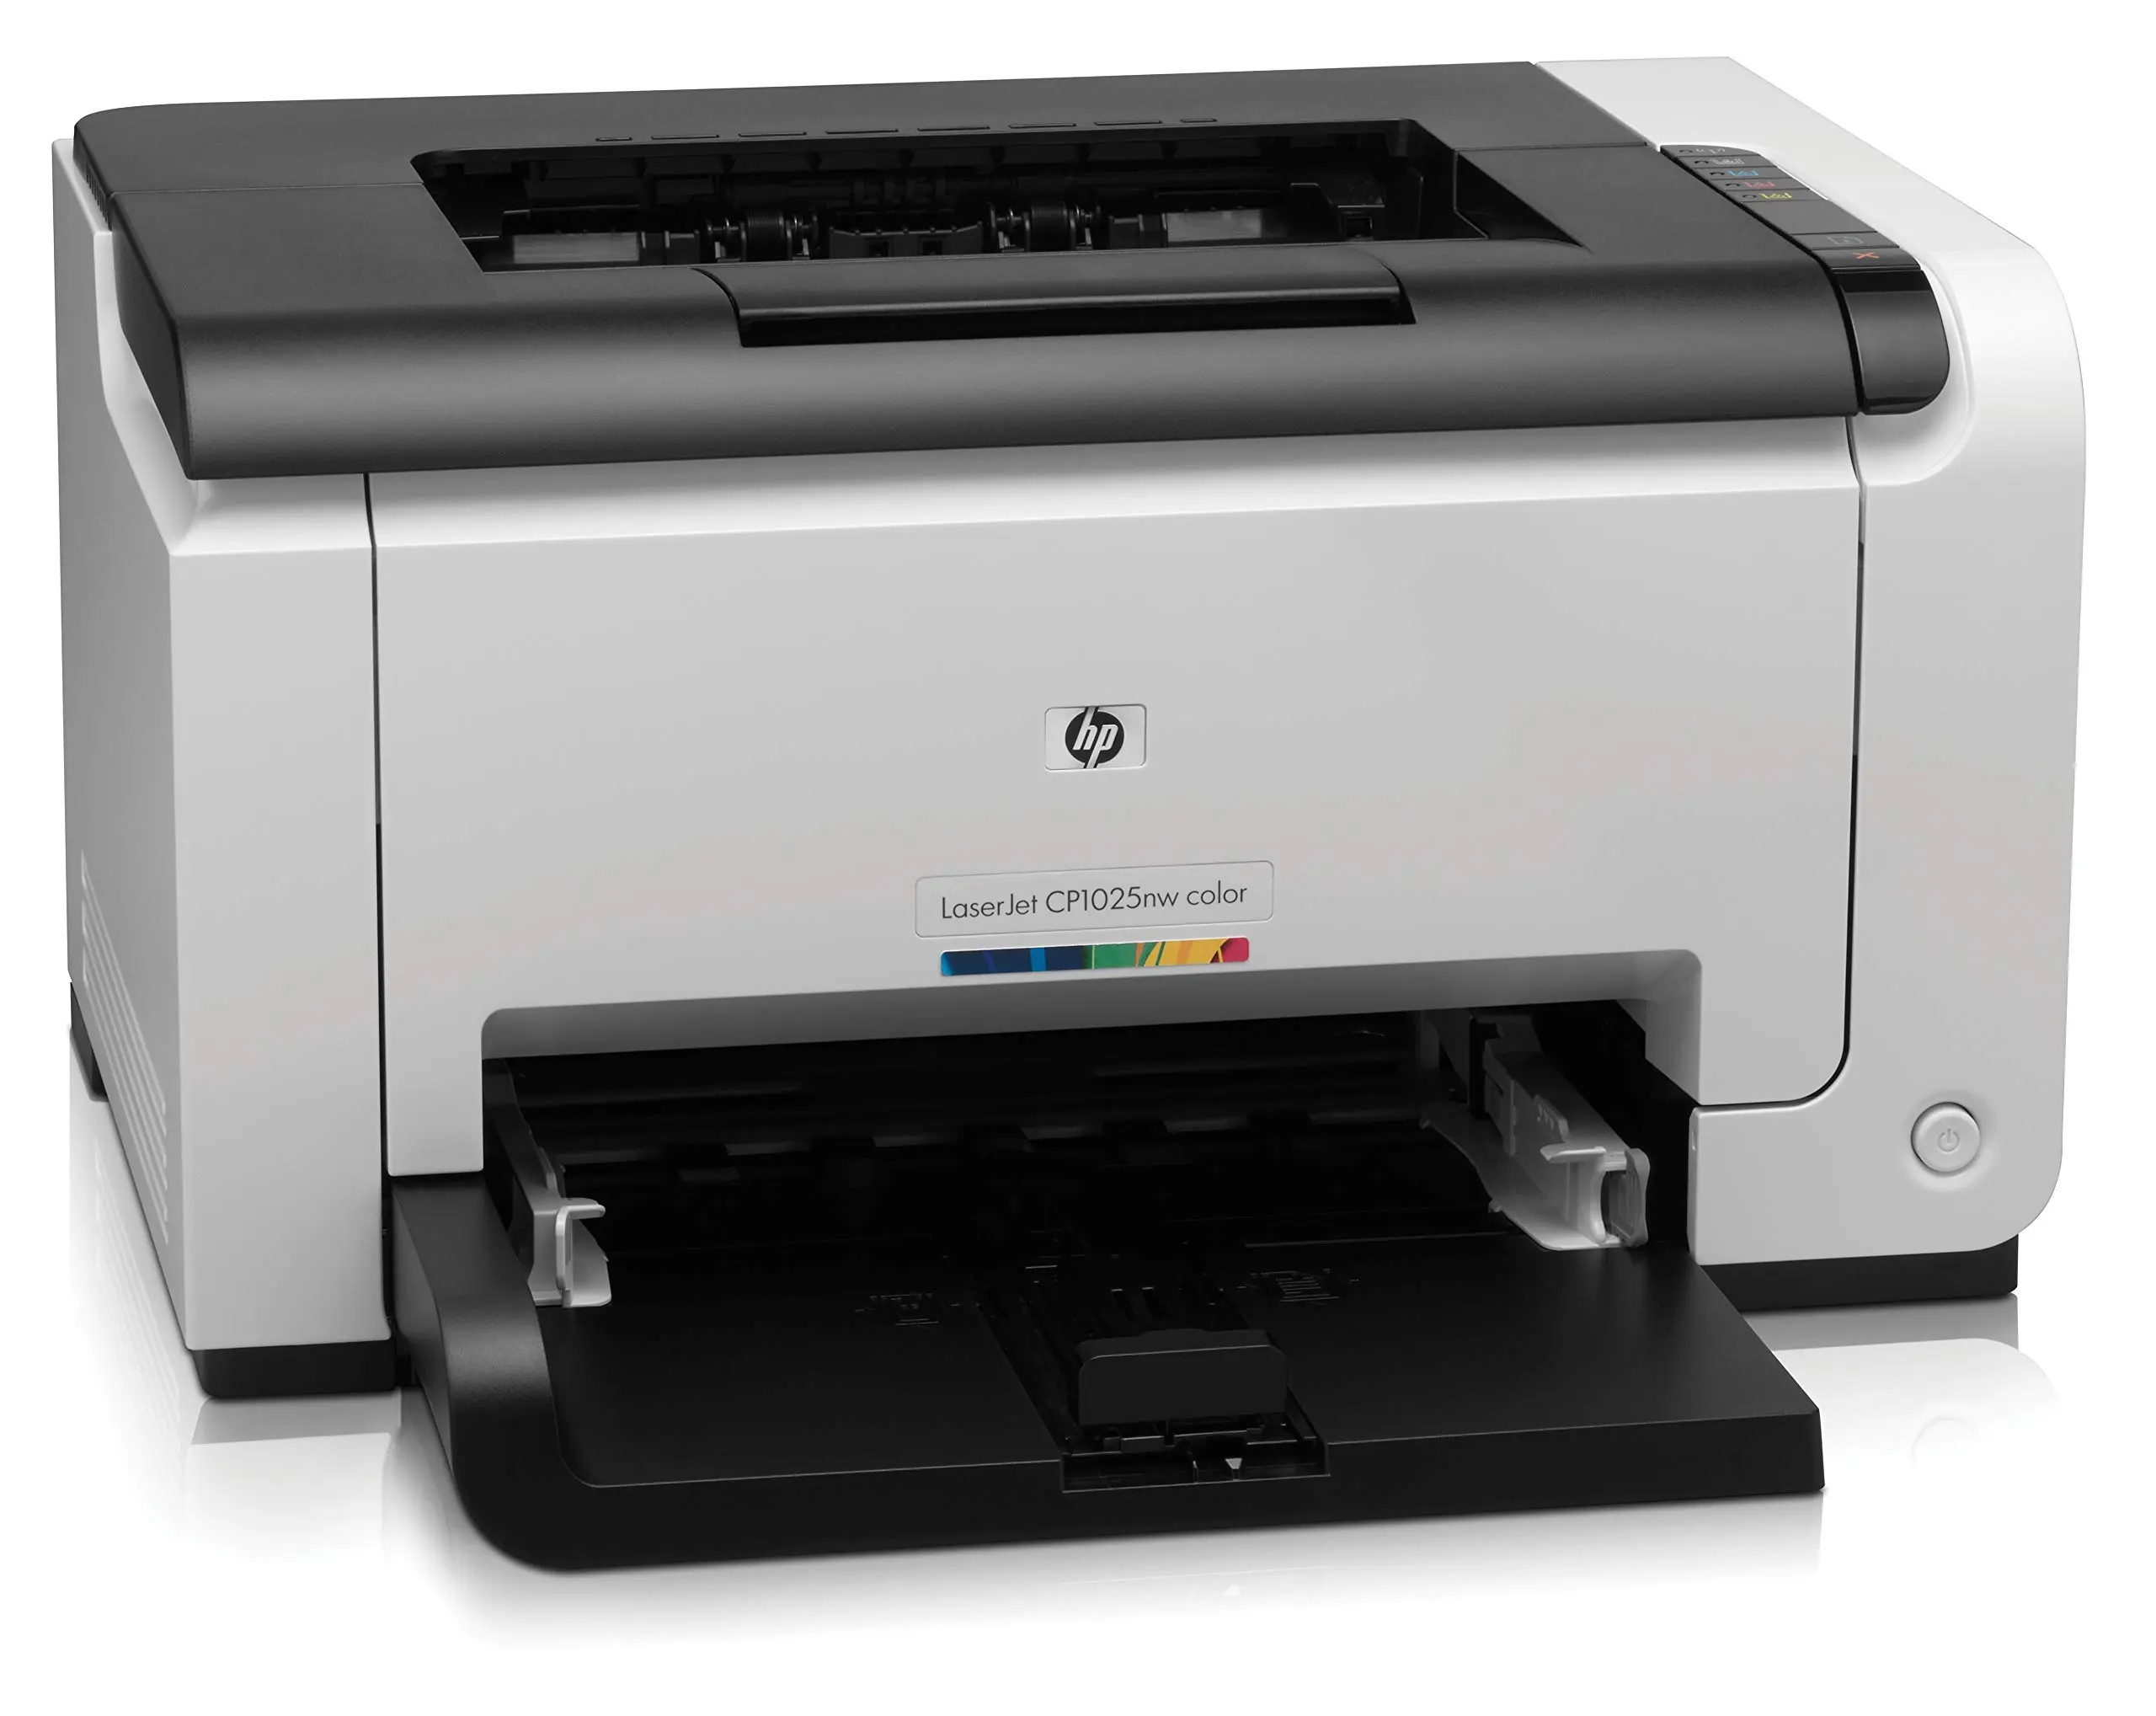 hewlett packard cp1025nw colour laser printer - What is the price of HP LaserJet CP1025 color printer in India